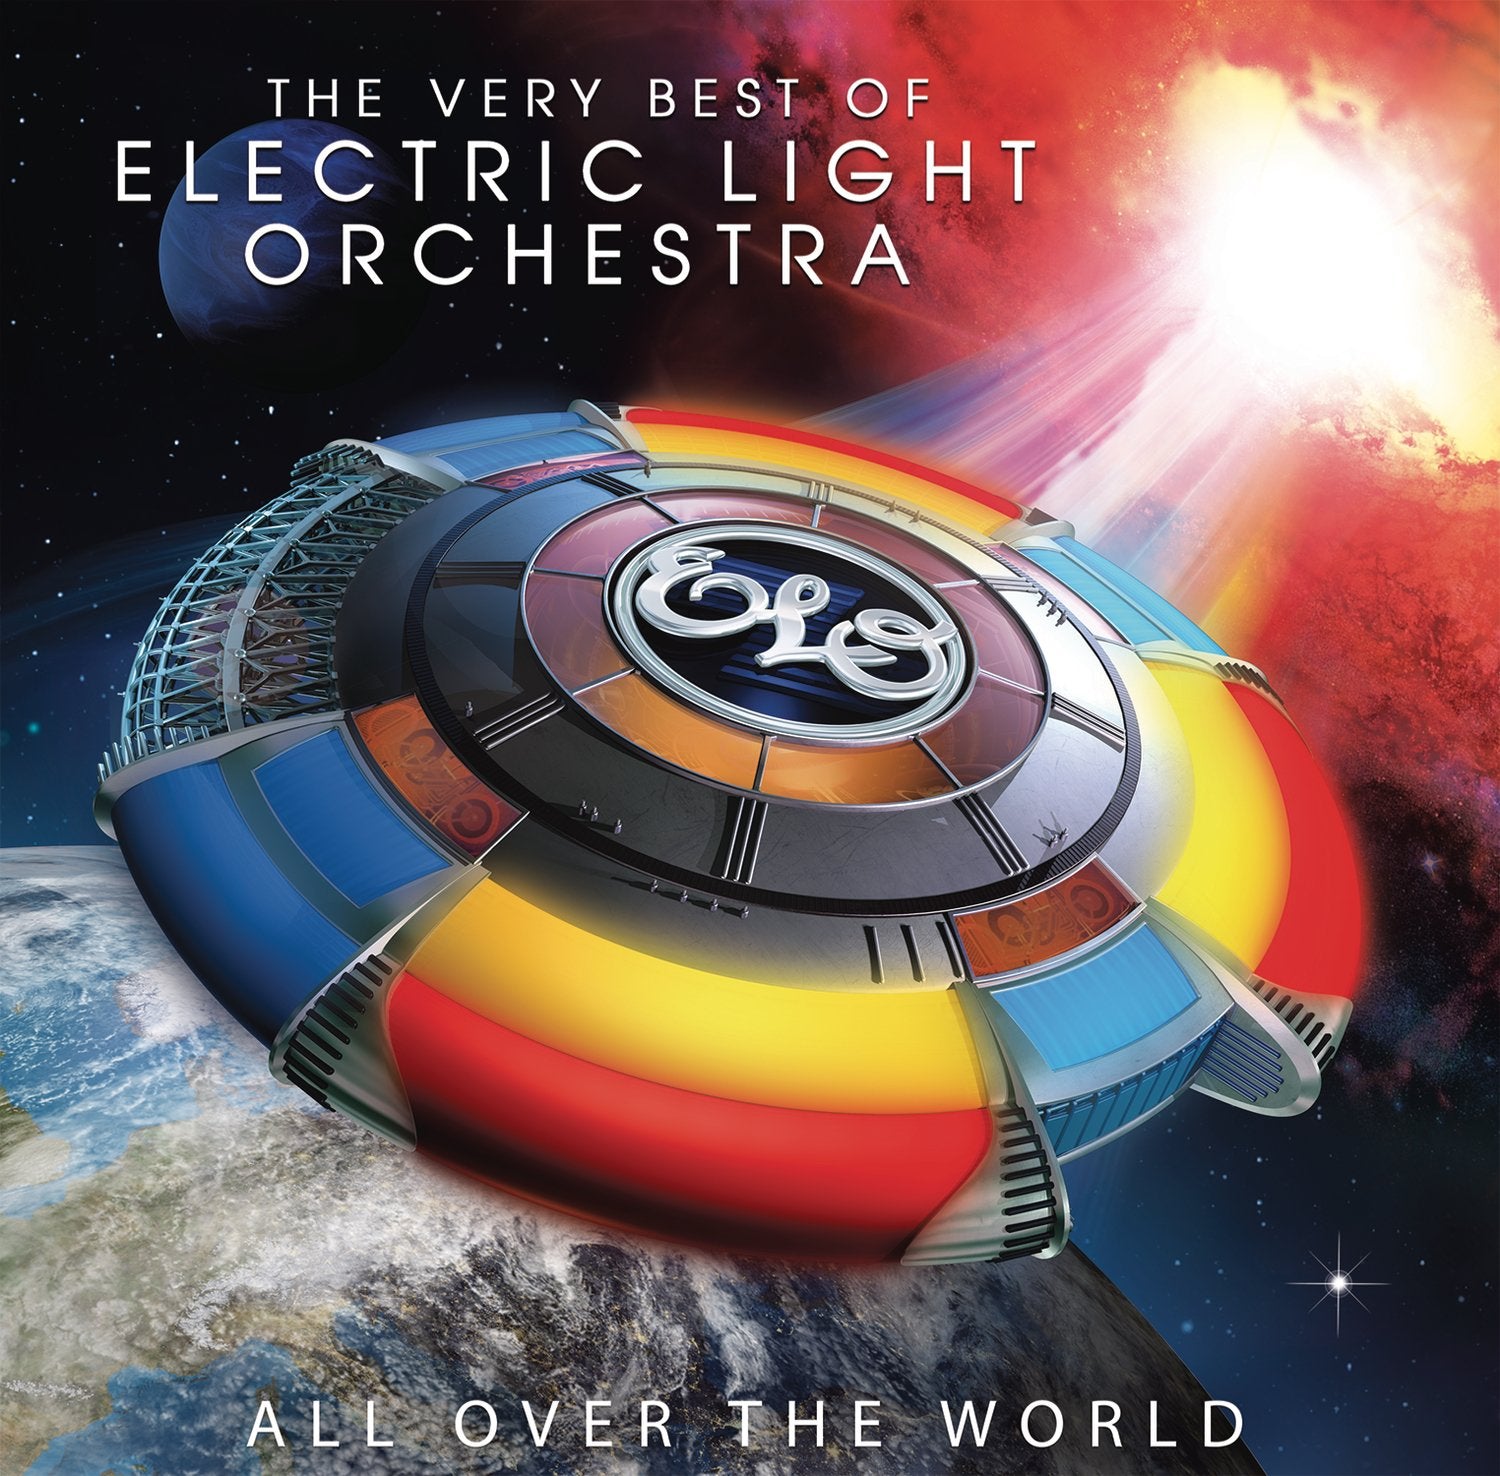 All Over The World: The Very Best Of Electric Light Orchestra (Vinyl) Album